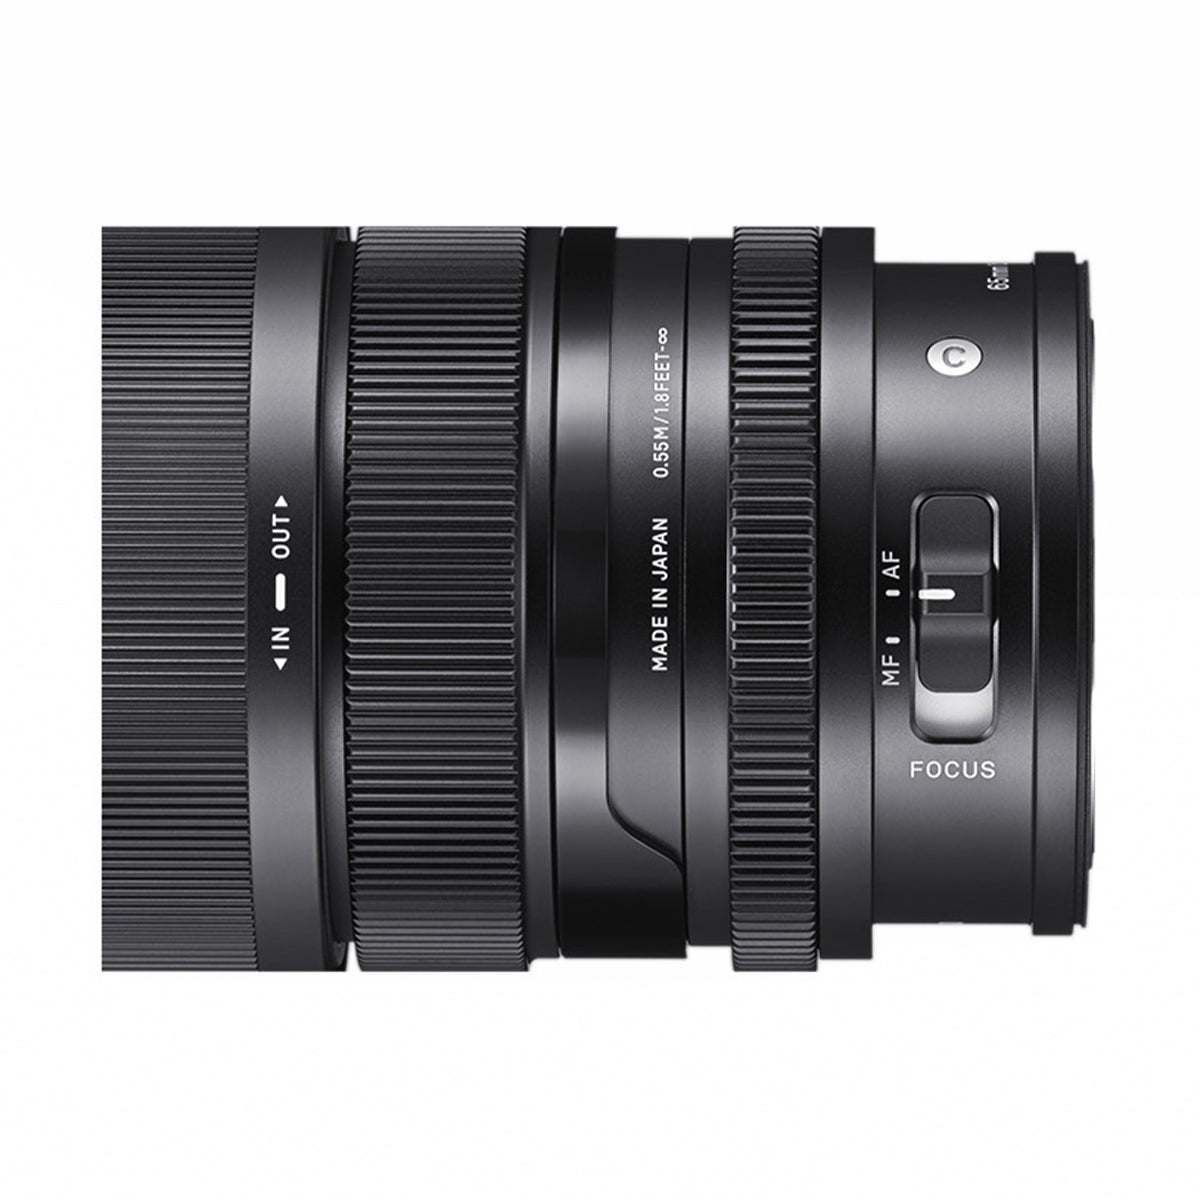 Sigma 35mm f/2 DG DN Contemporary Lens for Sony FE